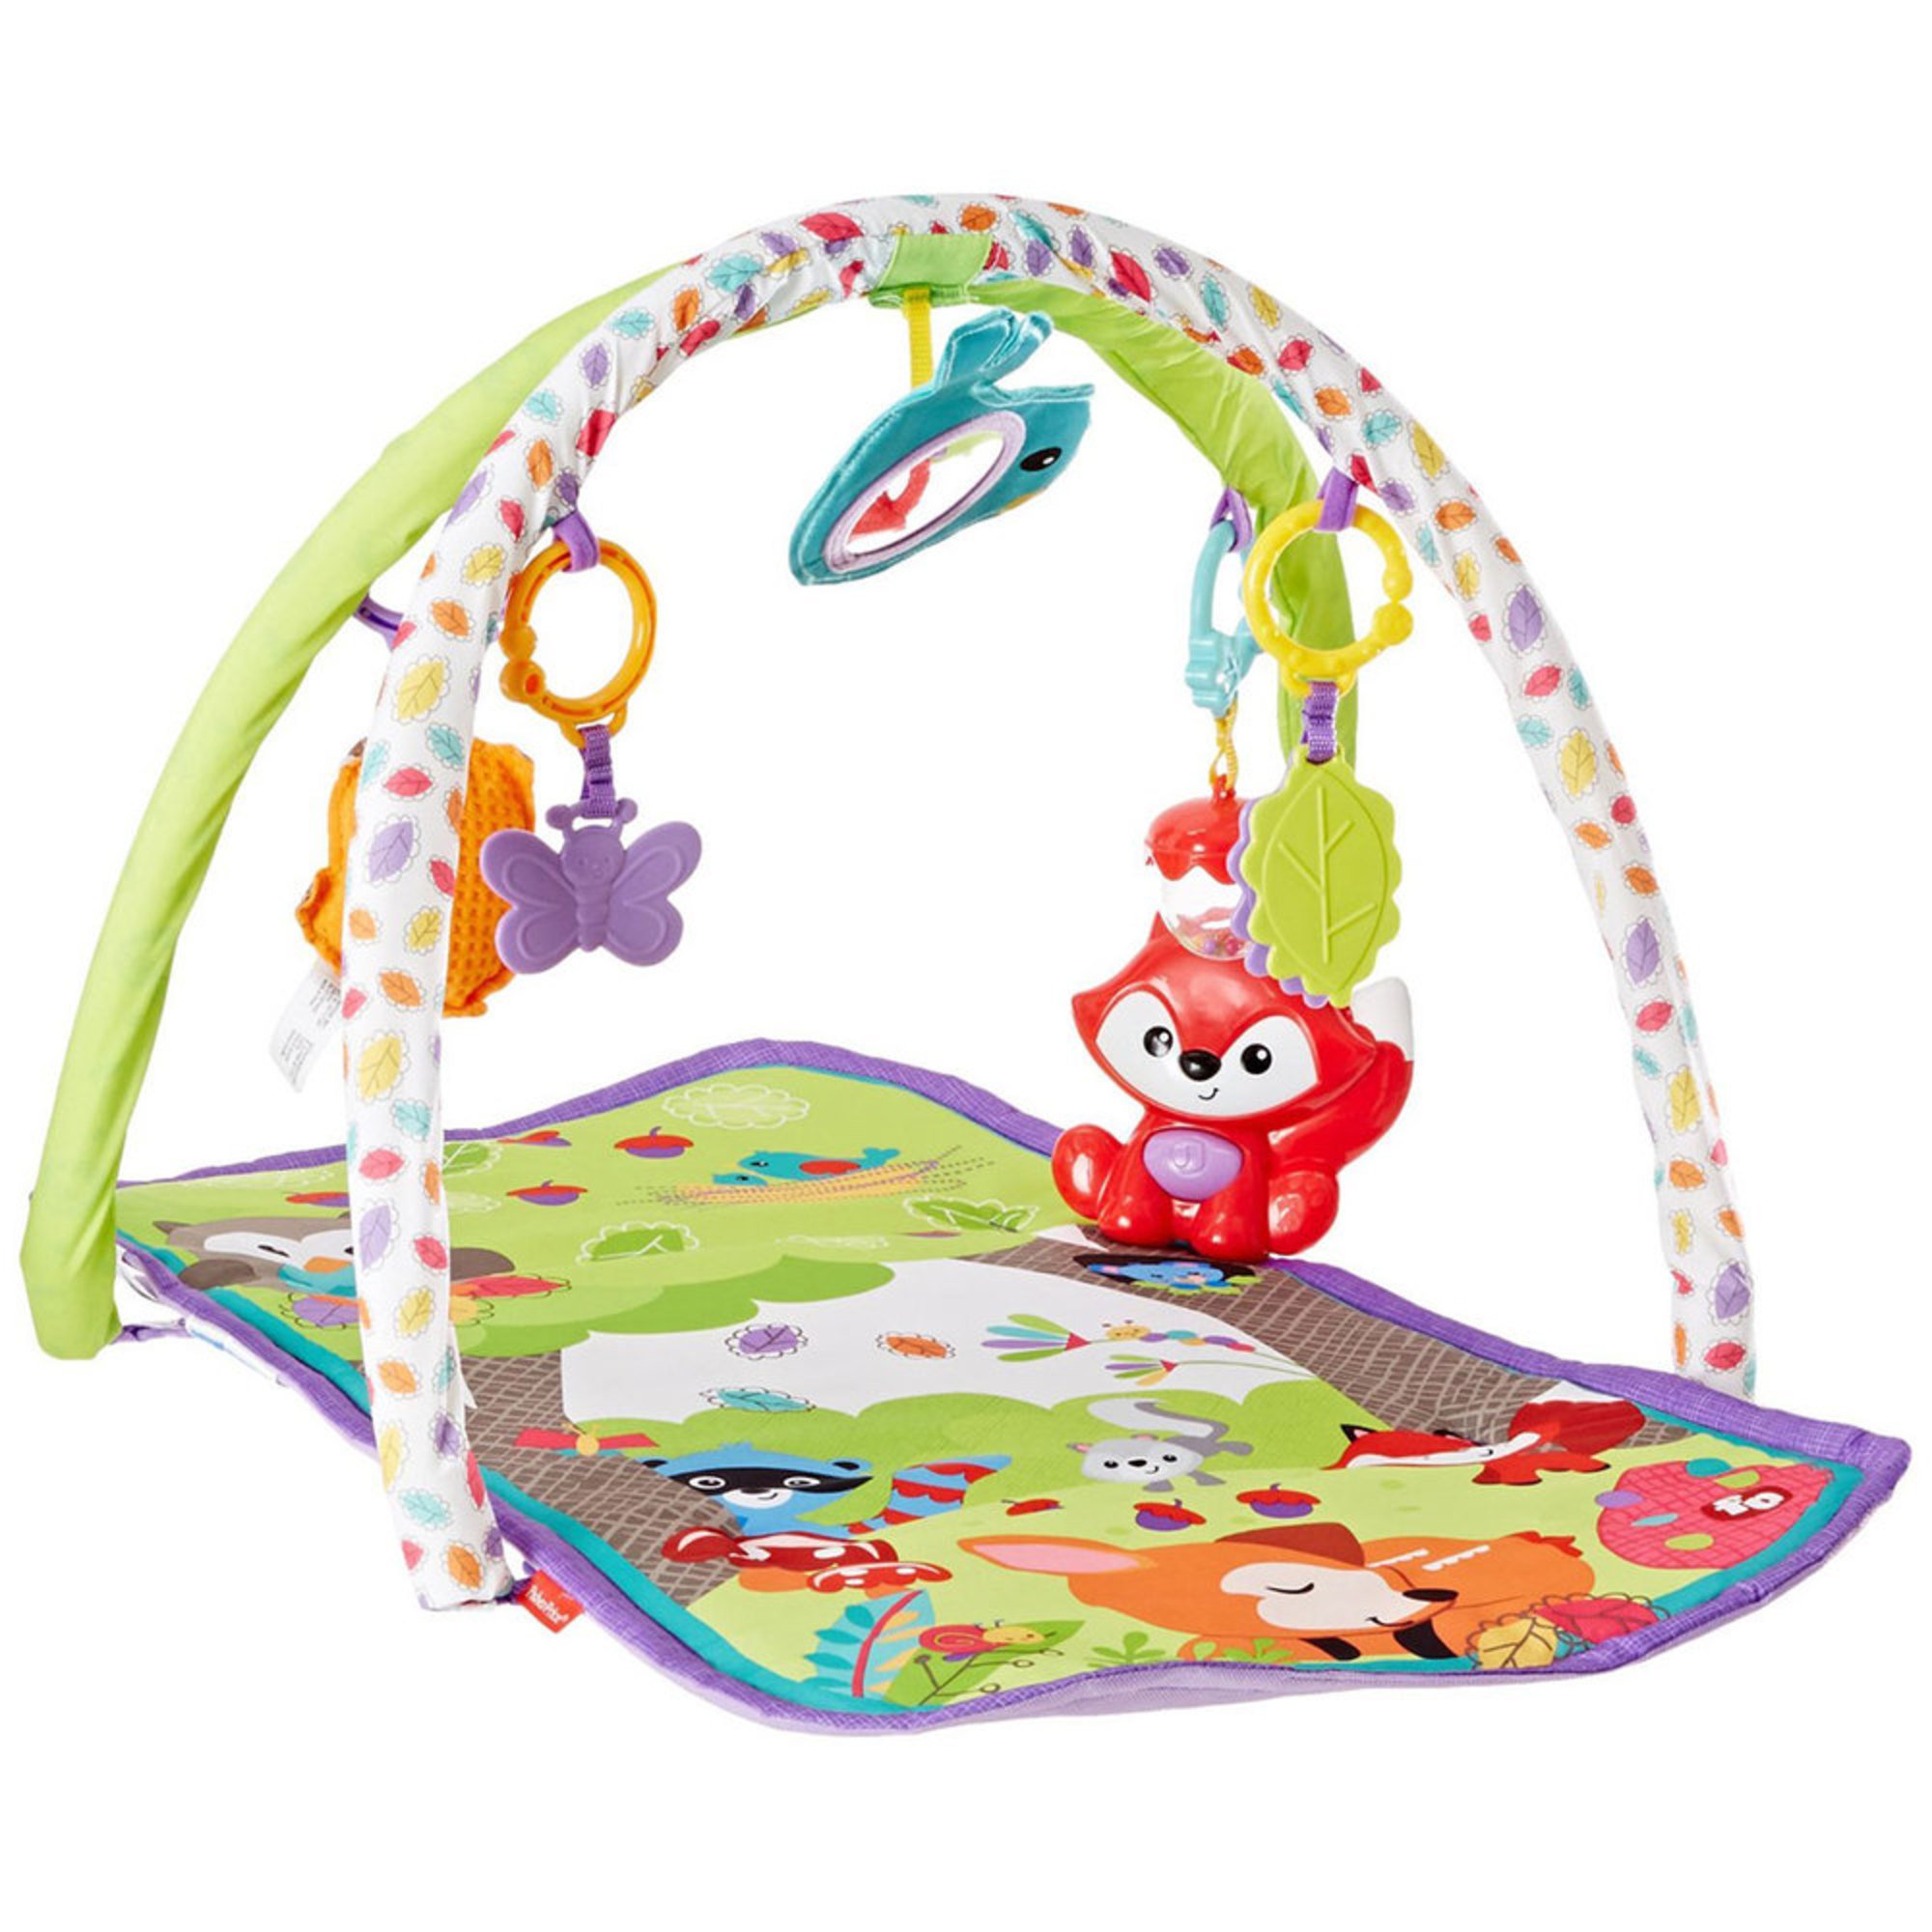 Fisher Price 3 In 1 Musical Activity Gym Gyms Playmats Baby